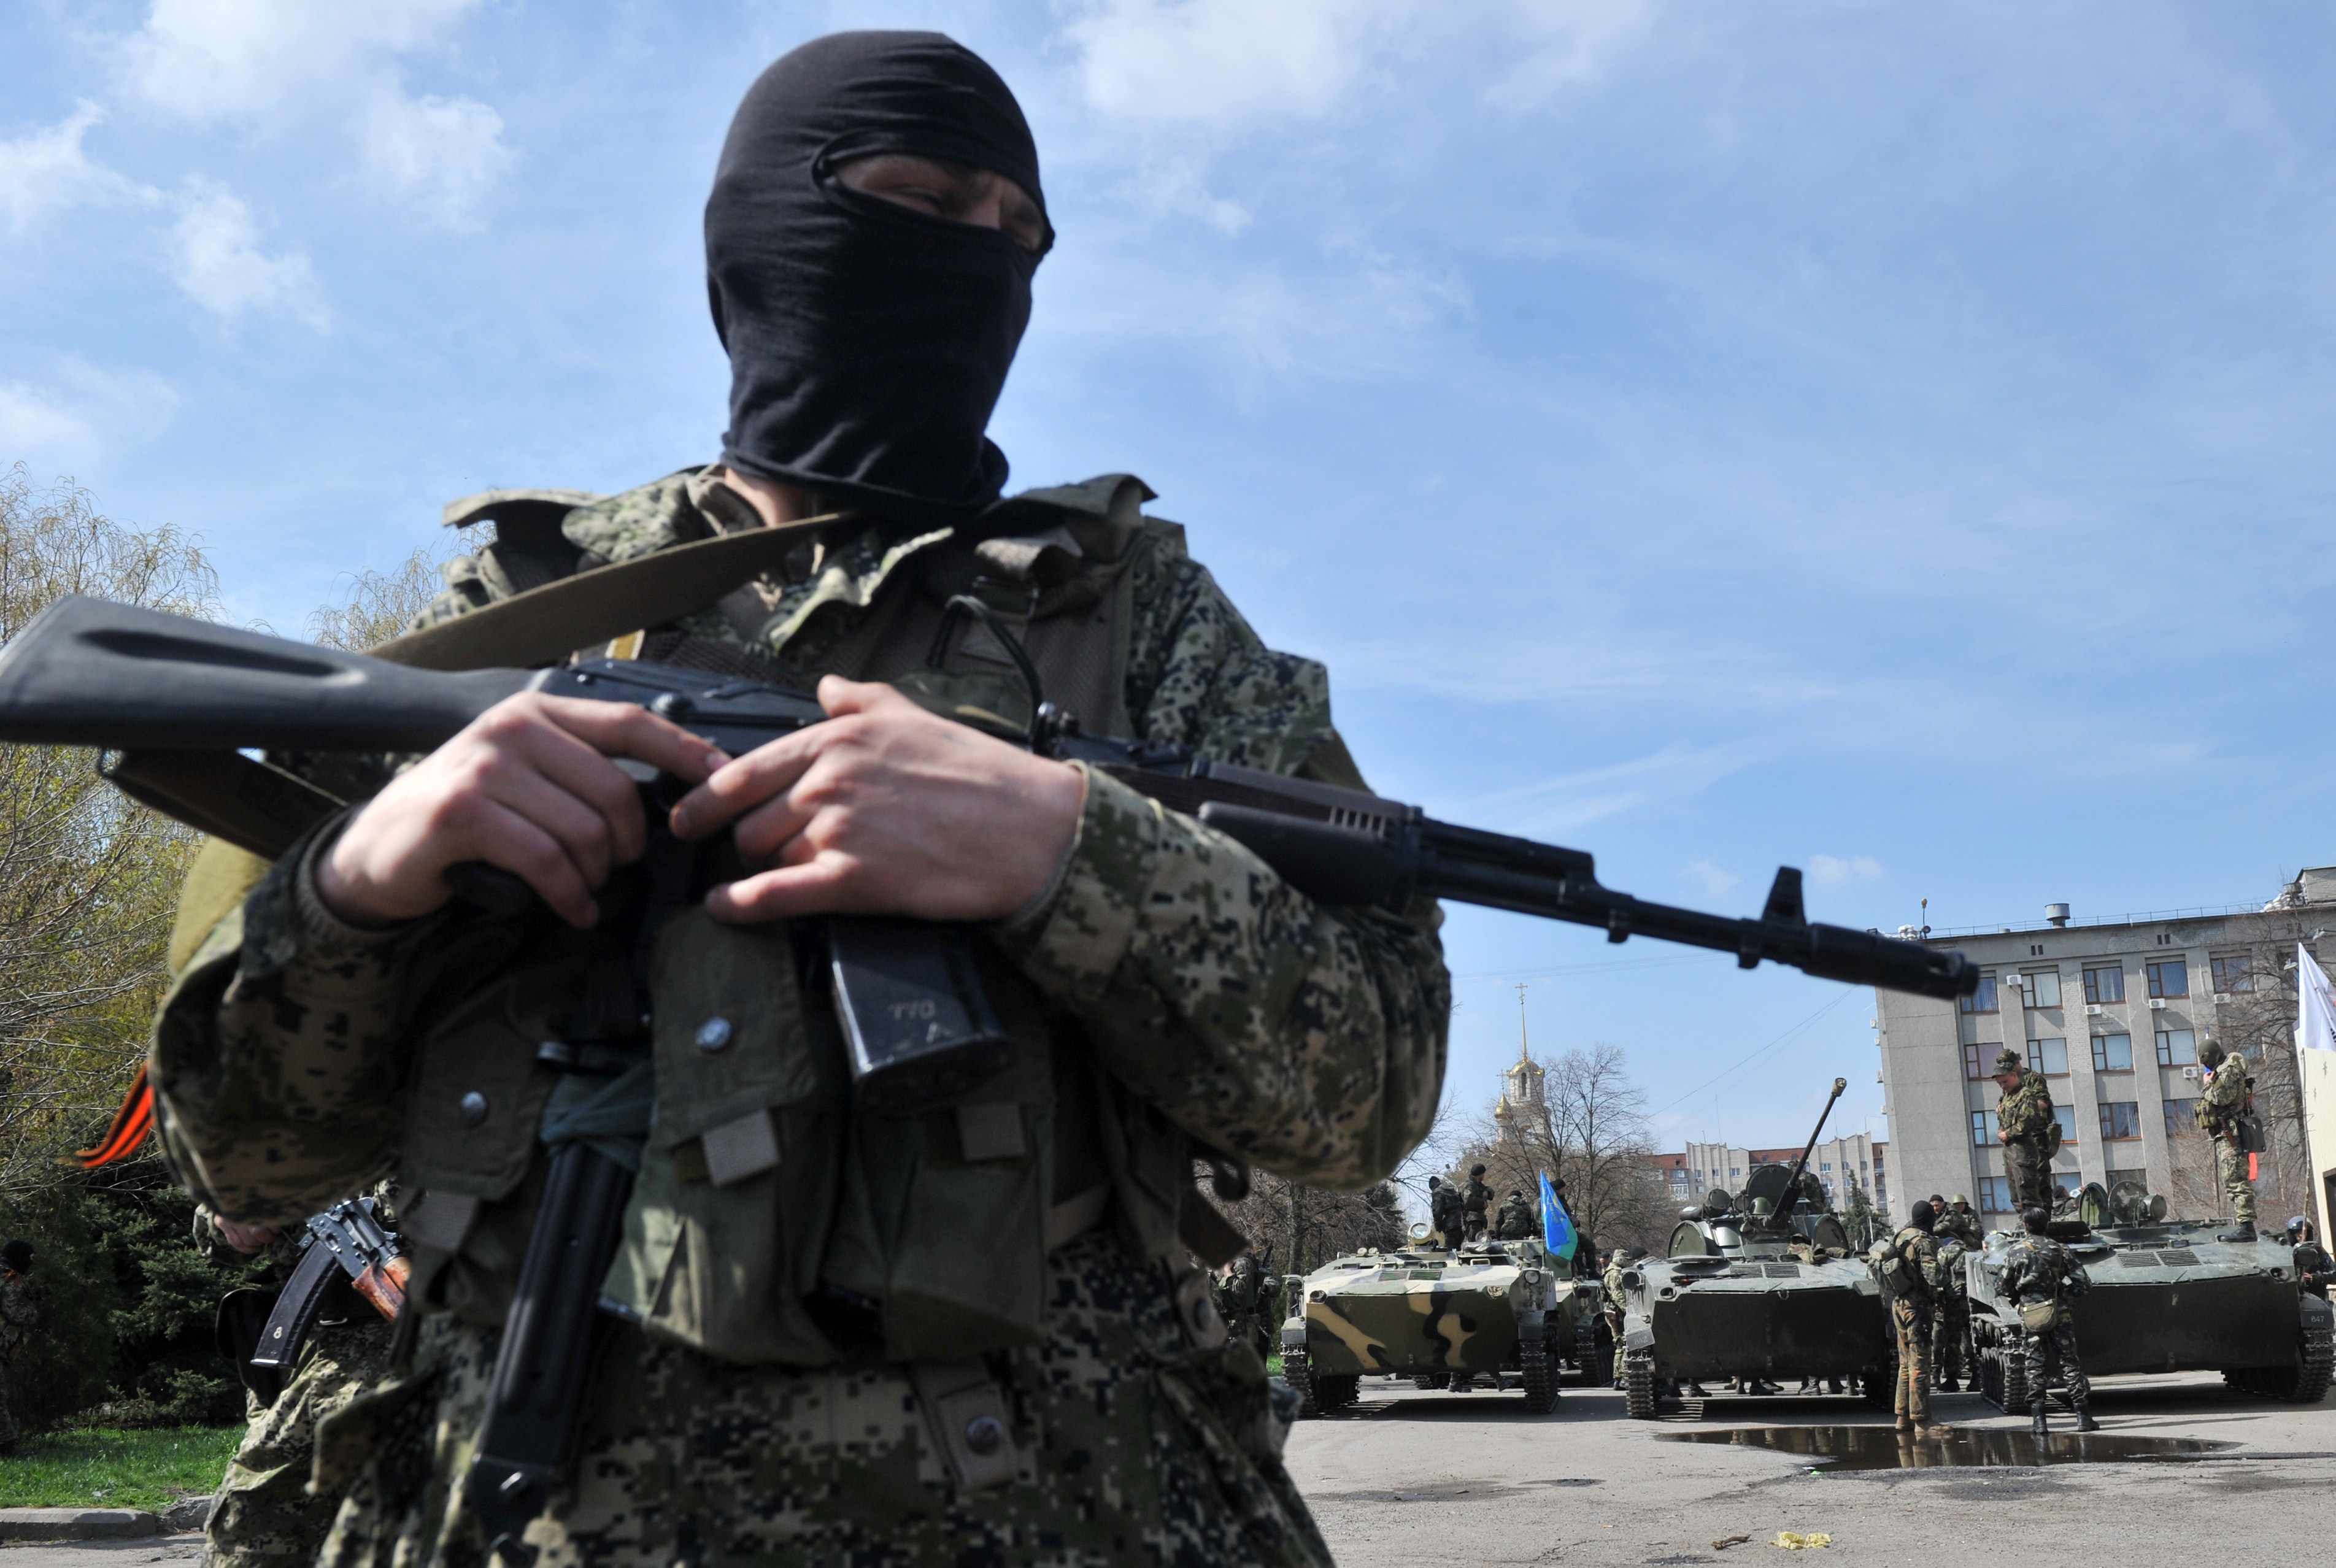 Armed militants outside the regional state building seized by pro-Russian separatists in the eastern Ukrainian city of Slavyansk on Wednesday. (Genya Savilov / AFP / Getty Images)